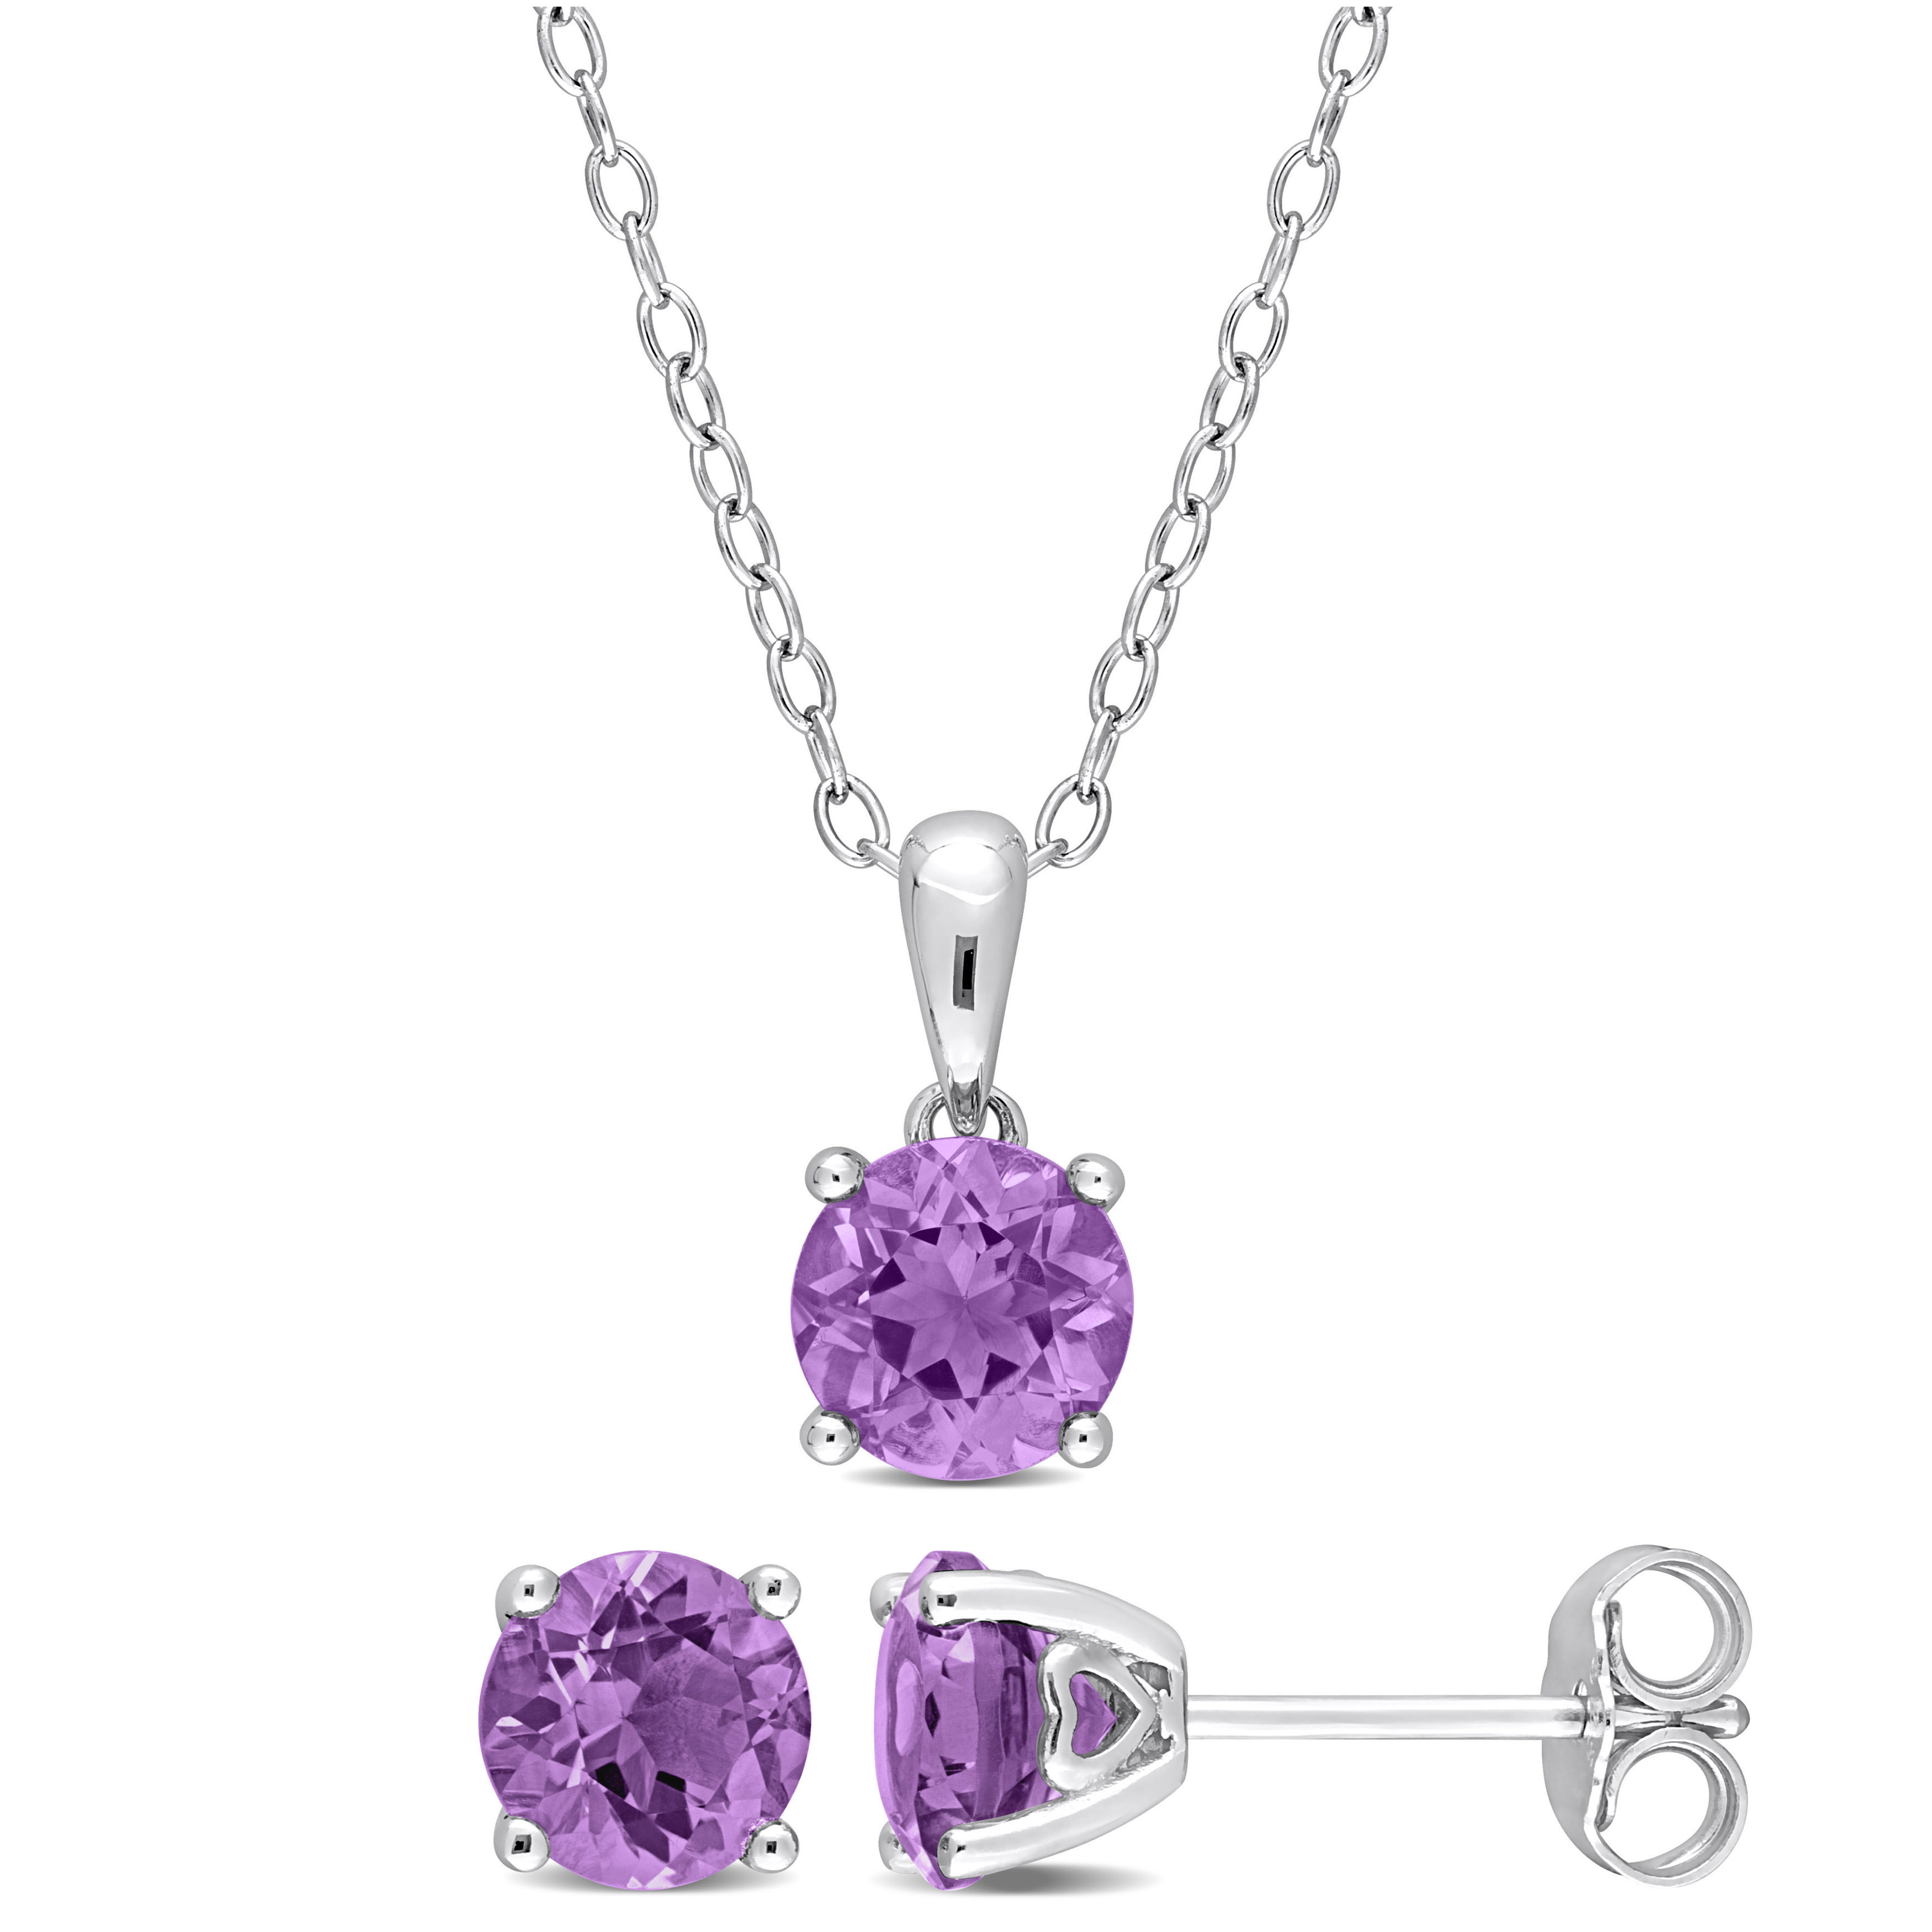 2 CT TGW Amethyst 2-Piece Solitaire Pendant with Chain and Stud Earrings Set in Sterling Silver